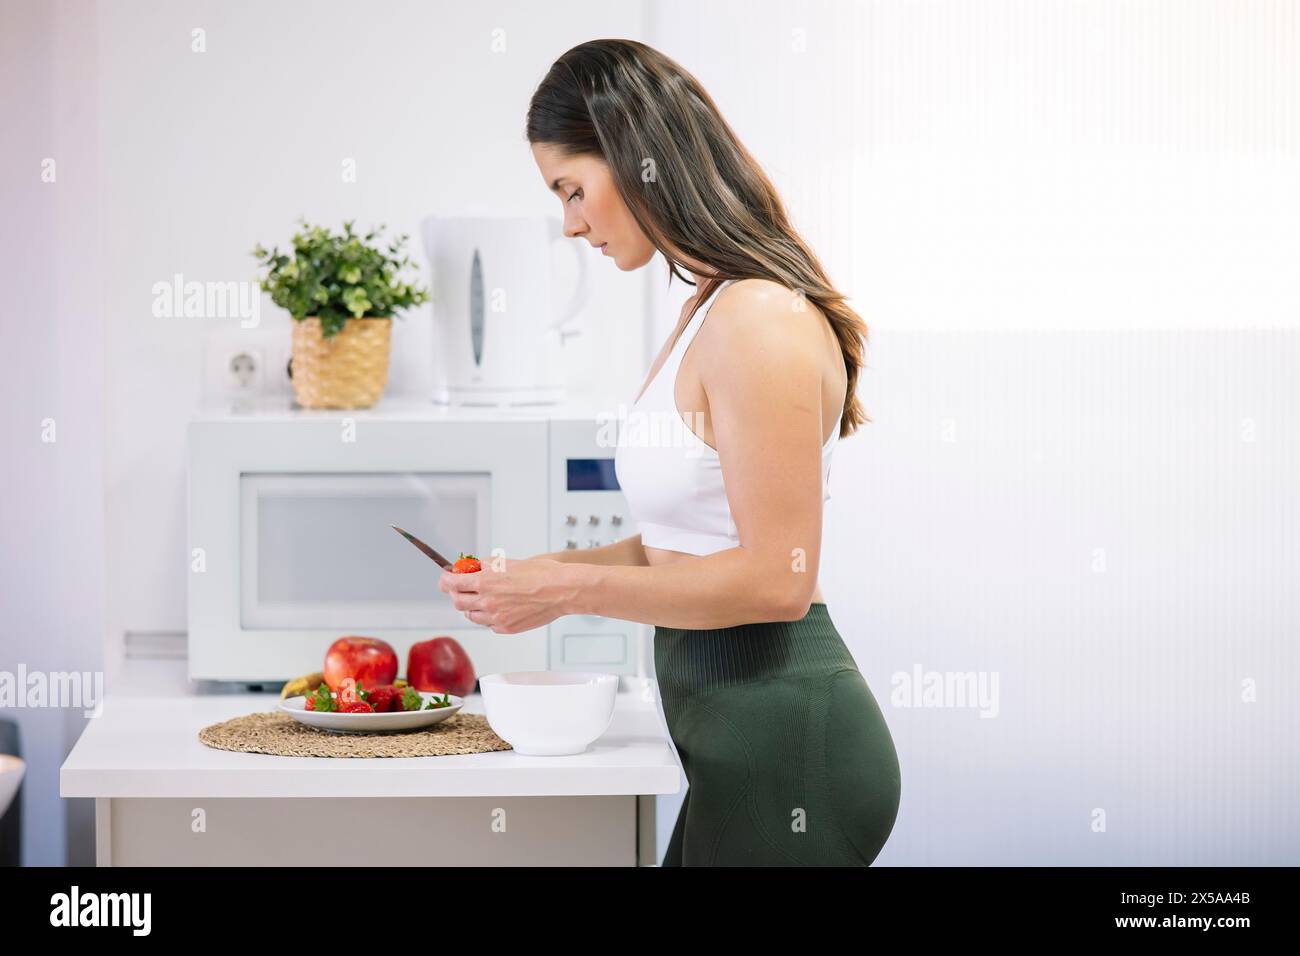 A fitness-focused woman in activewear is slicing vegetables for a nutritious meal in her modern kitchen, exemplifying a healthy lifestyle Stock Photo